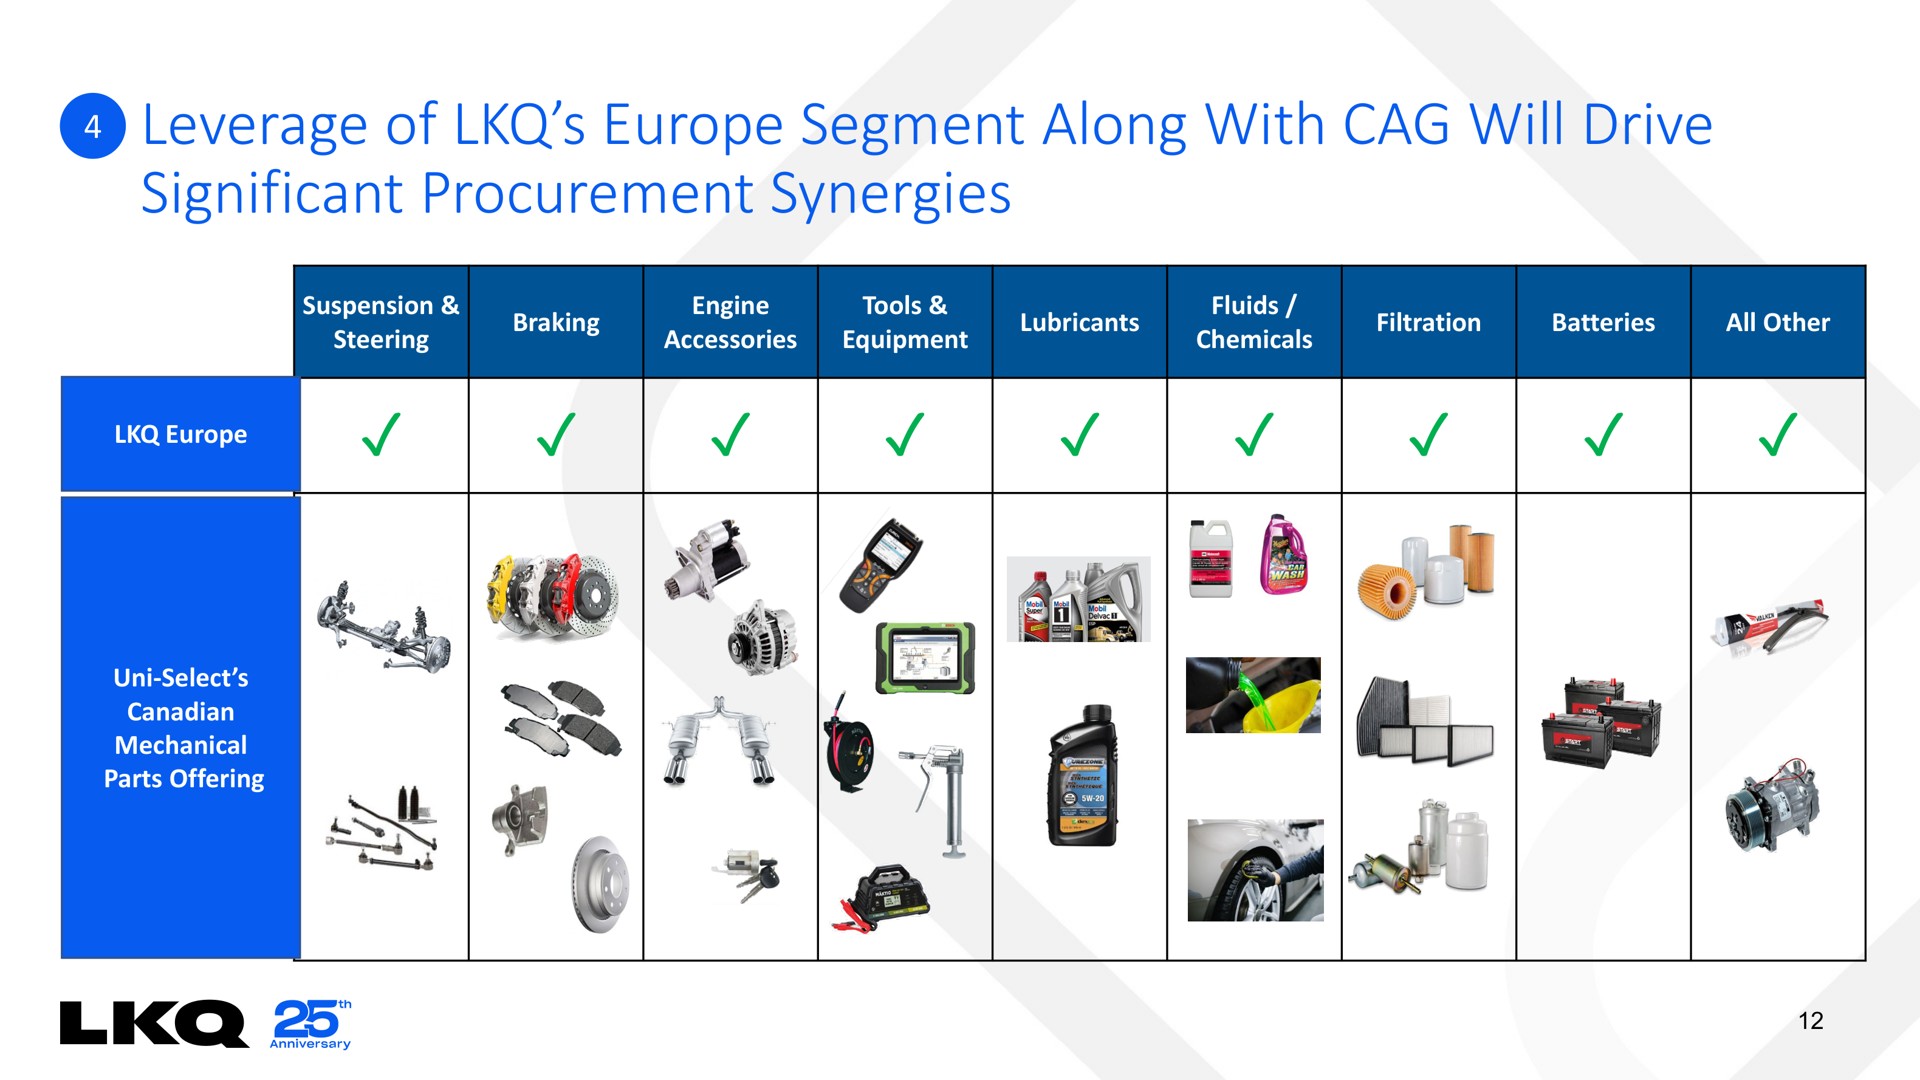 leverage of segment along with cag will drive significant procurement synergies | LKQ